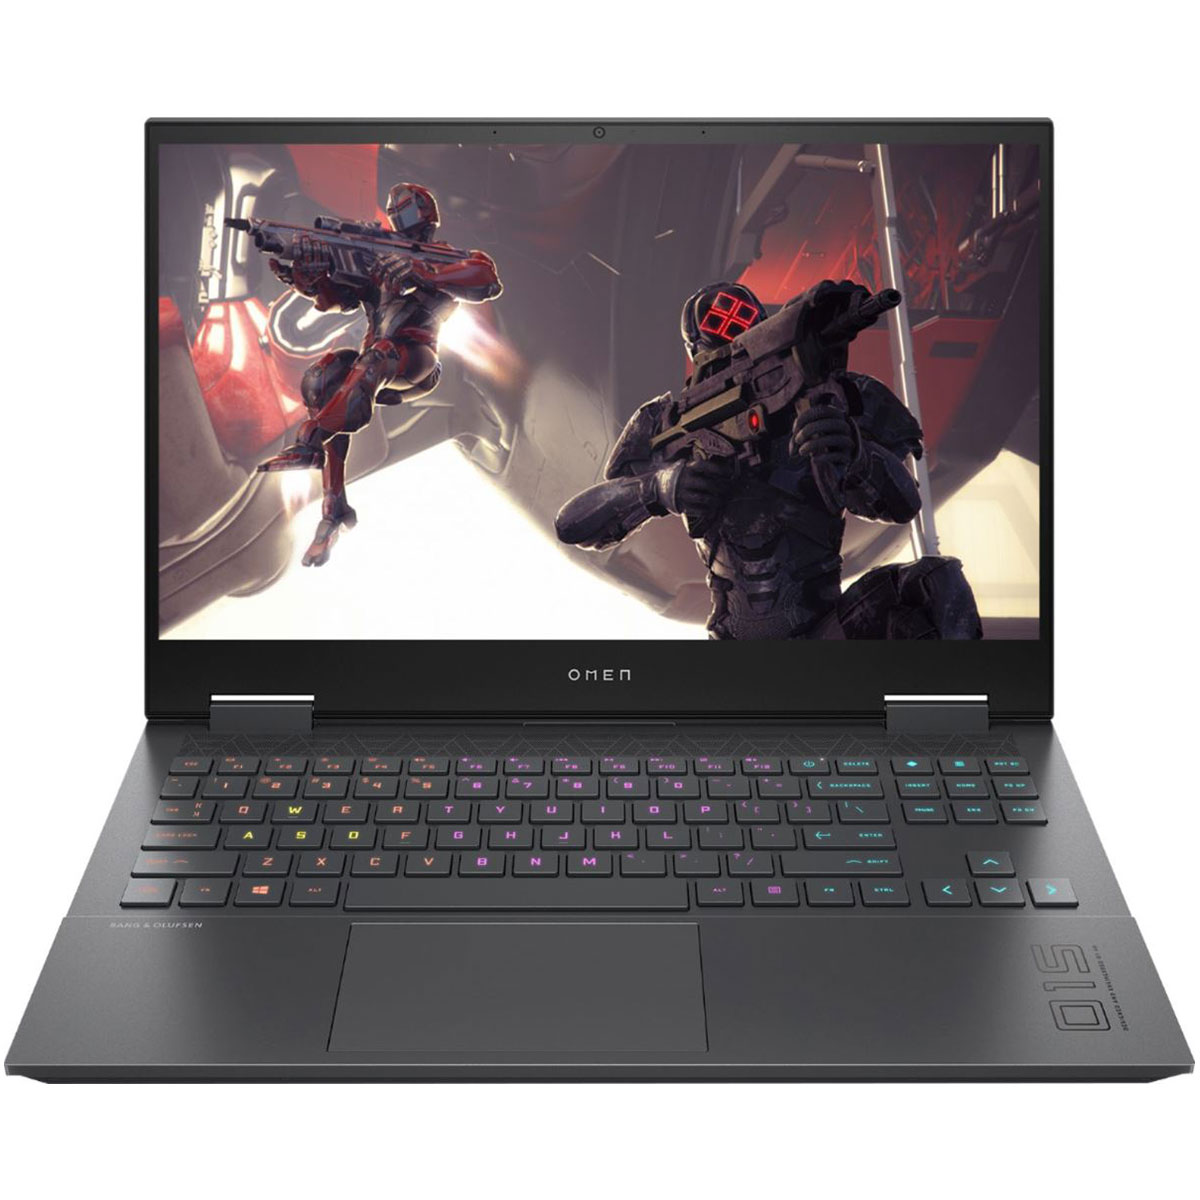 Hp Omen 15t-ek100 Intel Core i7 10th Gen 16GB RAM 512GB SSD 4GB NVIDIA  GeForce GTX 1650Ti 15.6 Inches FHD Gaming Laptop - Mombasa Computers